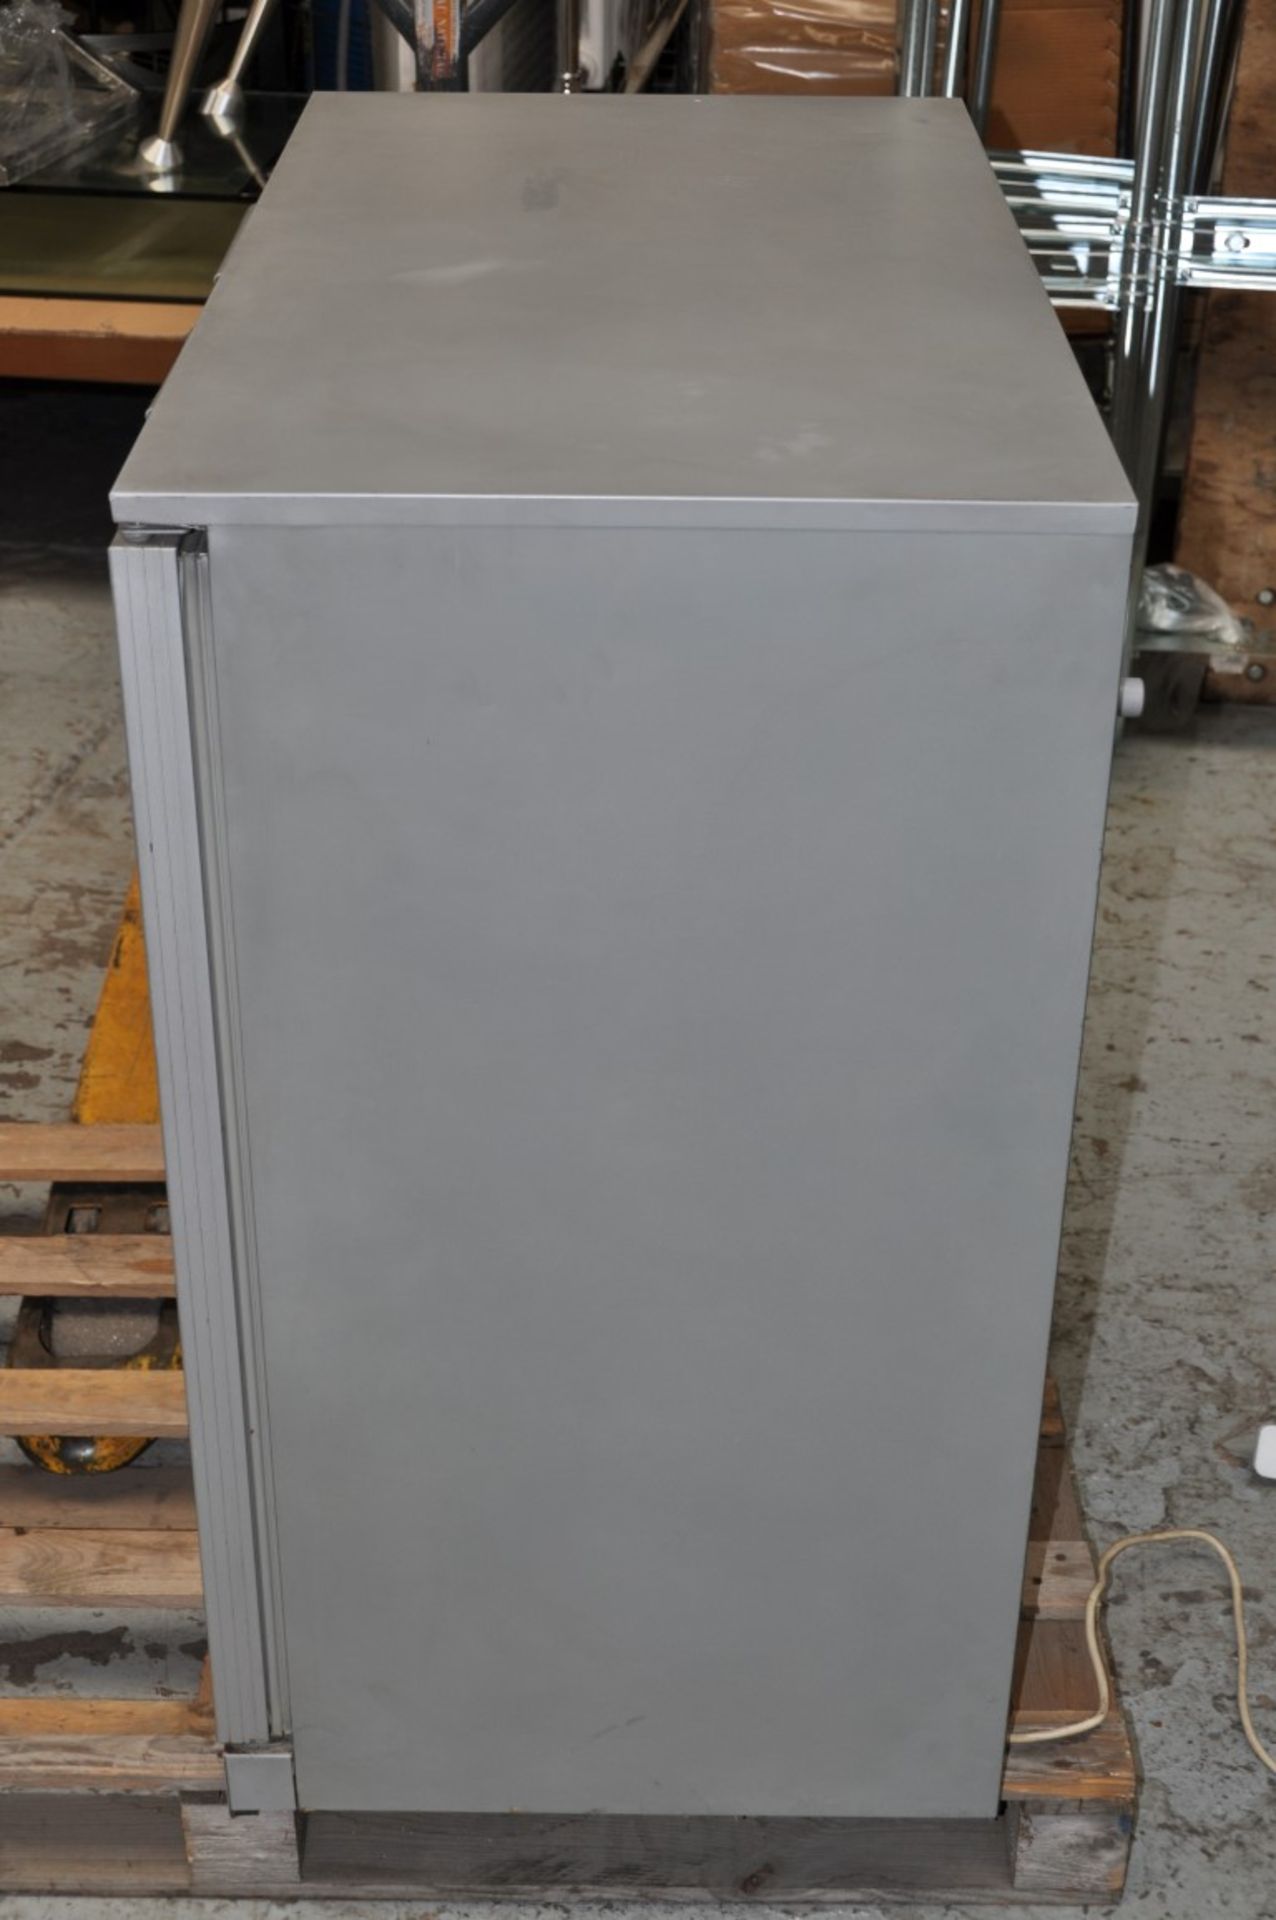 1 x Maidaid Halycon H900 Two Door Bottle Cooler With Internal Shelves - BEER FRIDGE - Ideal For - Image 4 of 5